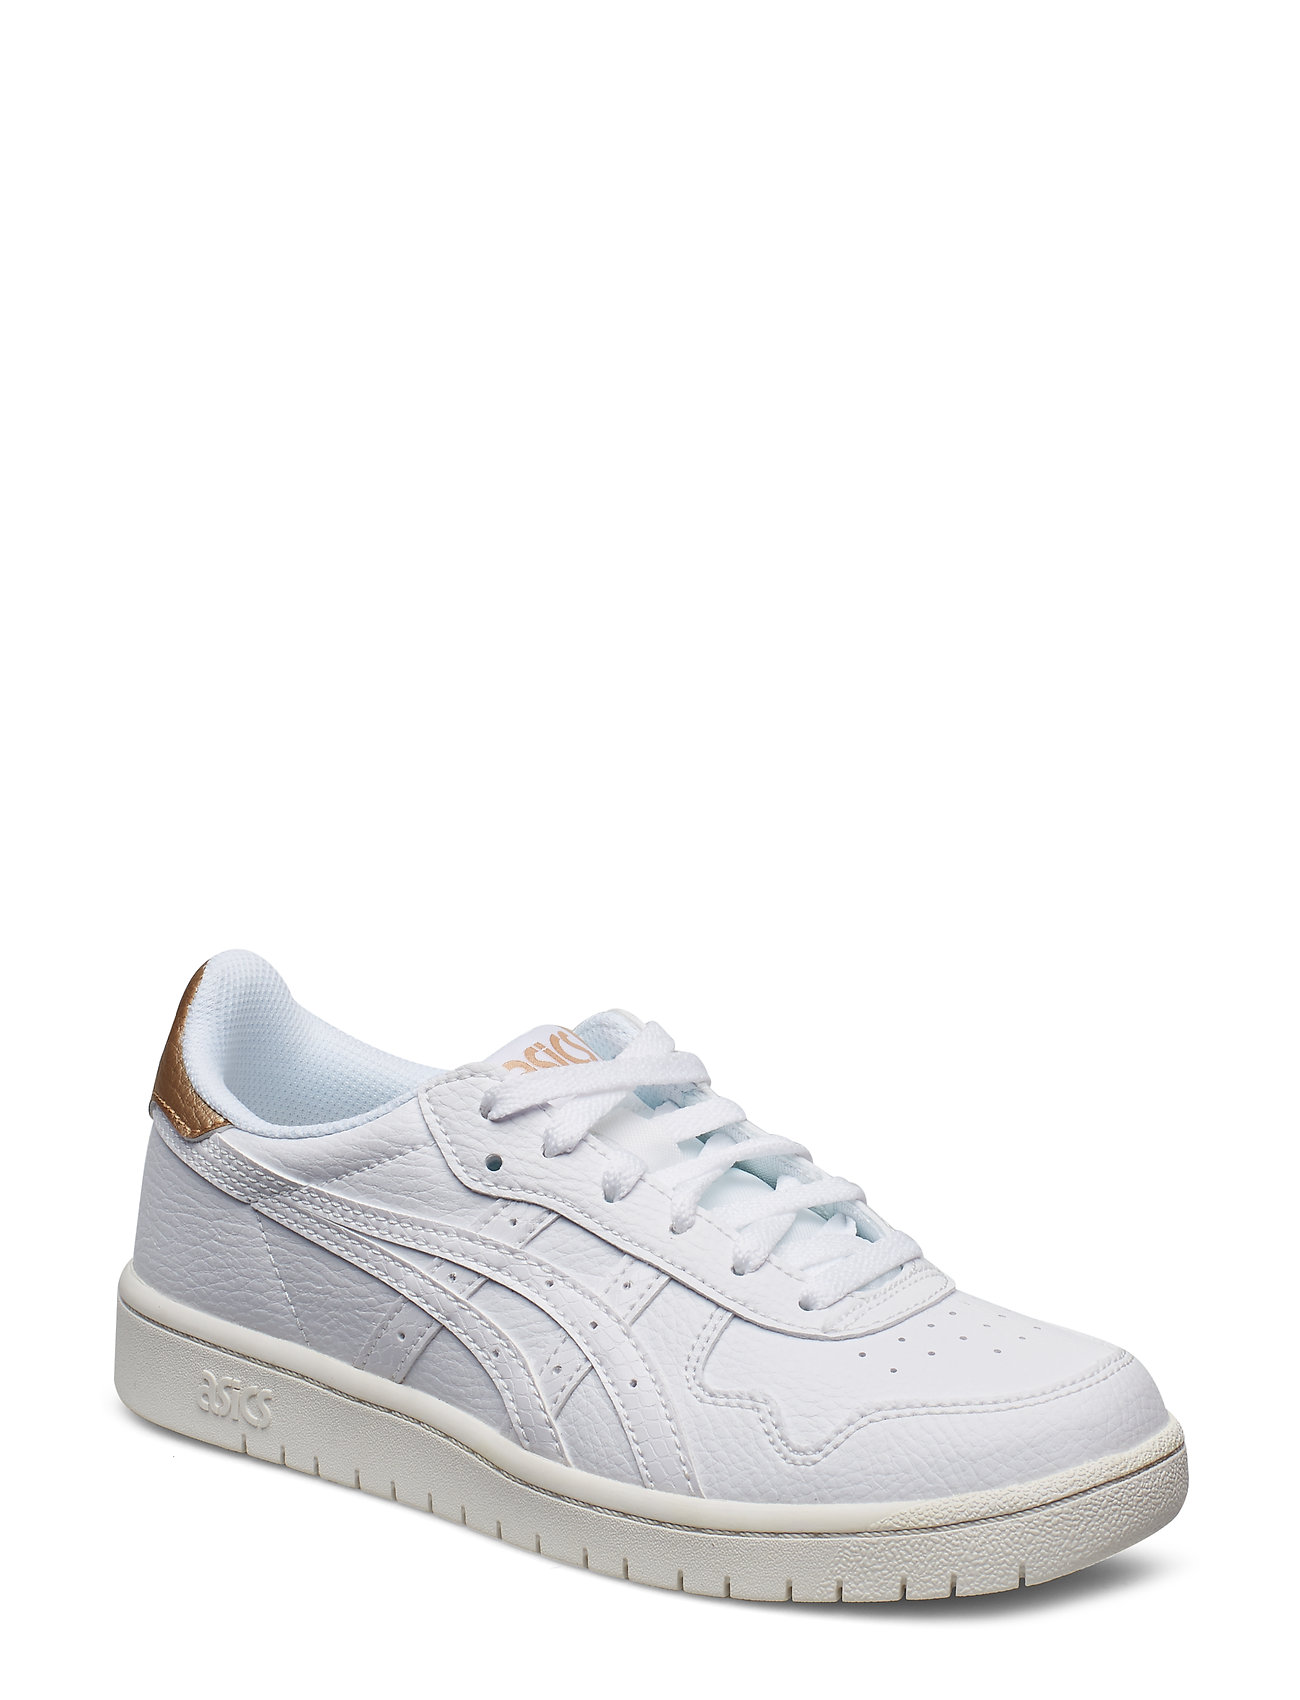 Japan S Low-top Sneakers White Asics